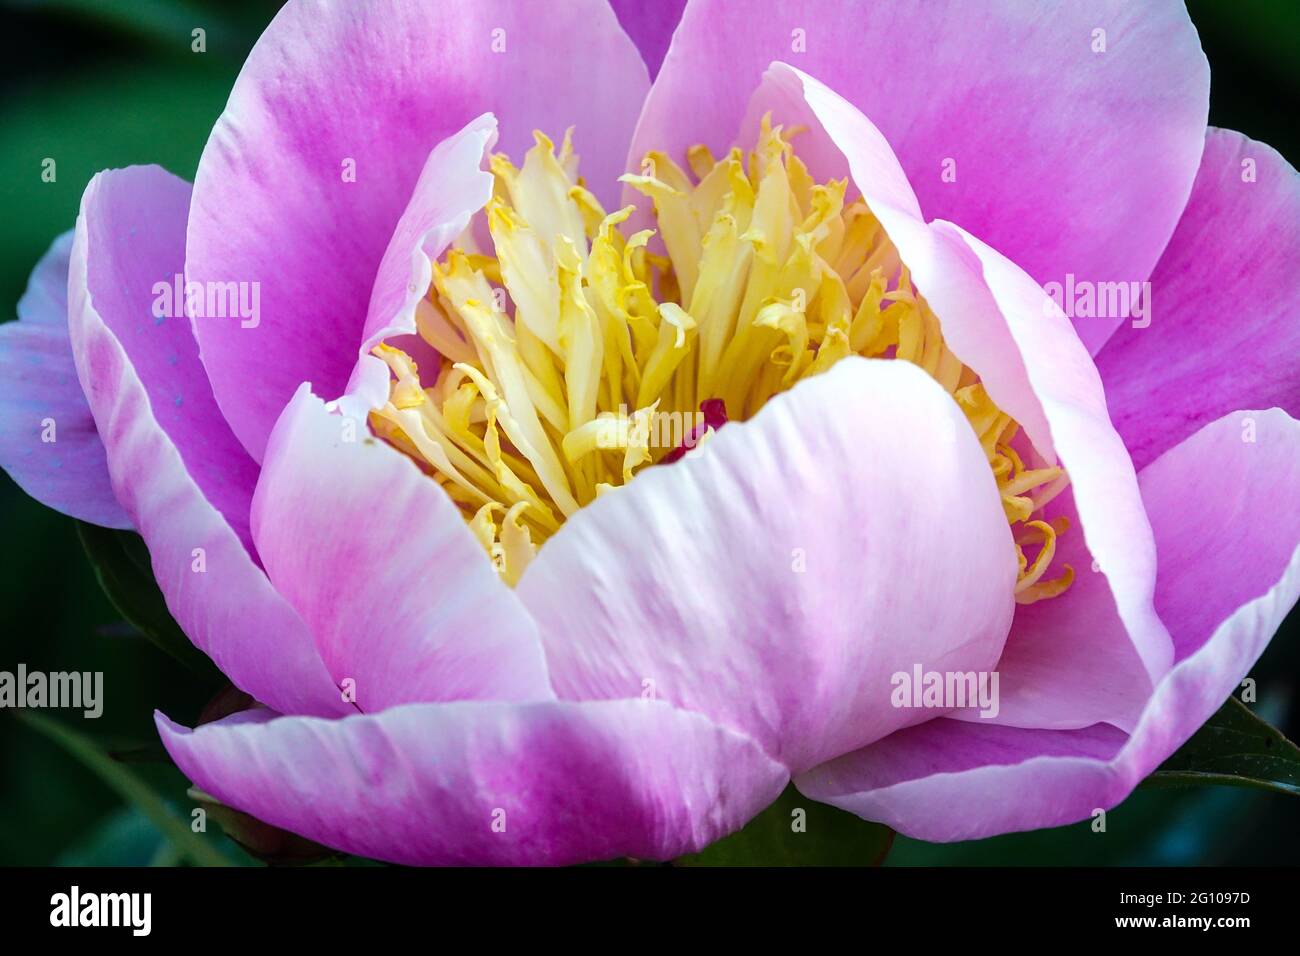 Paeonia Gleam of Light, close up flower pink cup-shaped Paeonia lactiflora Beauty Stock Photo